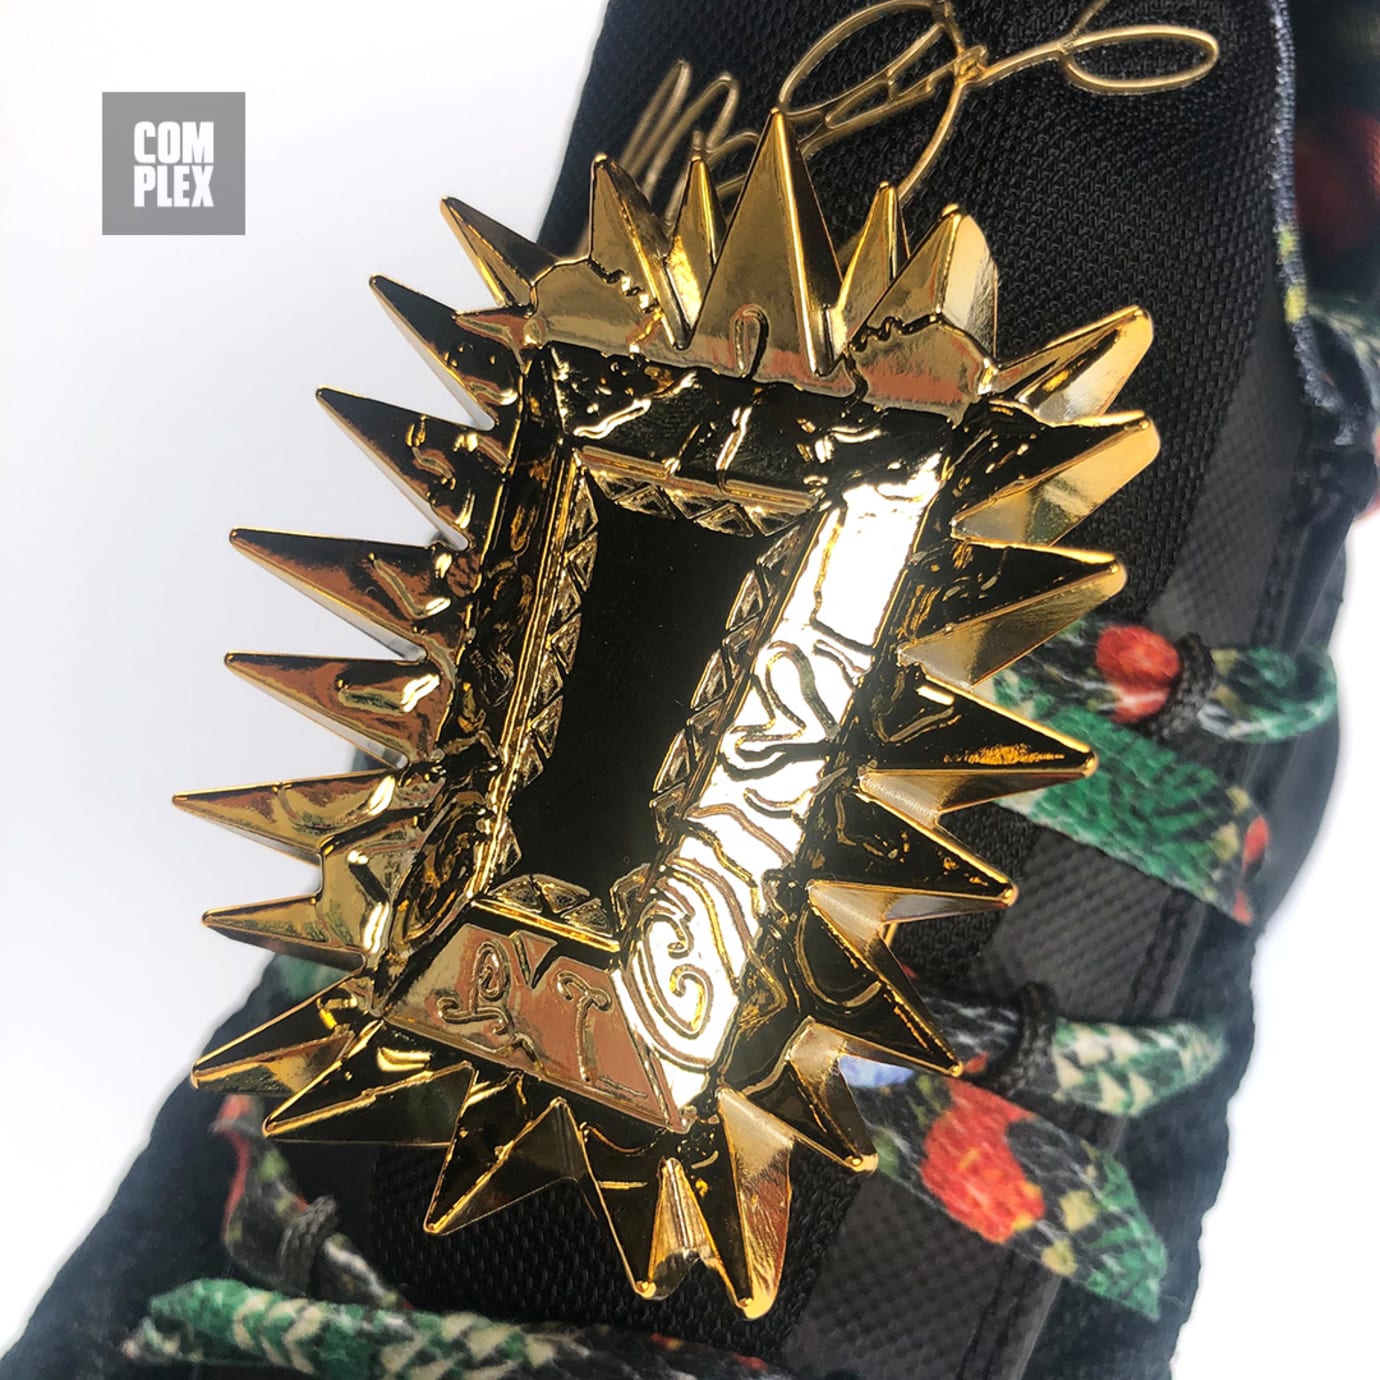 lebron watch the throne shoes